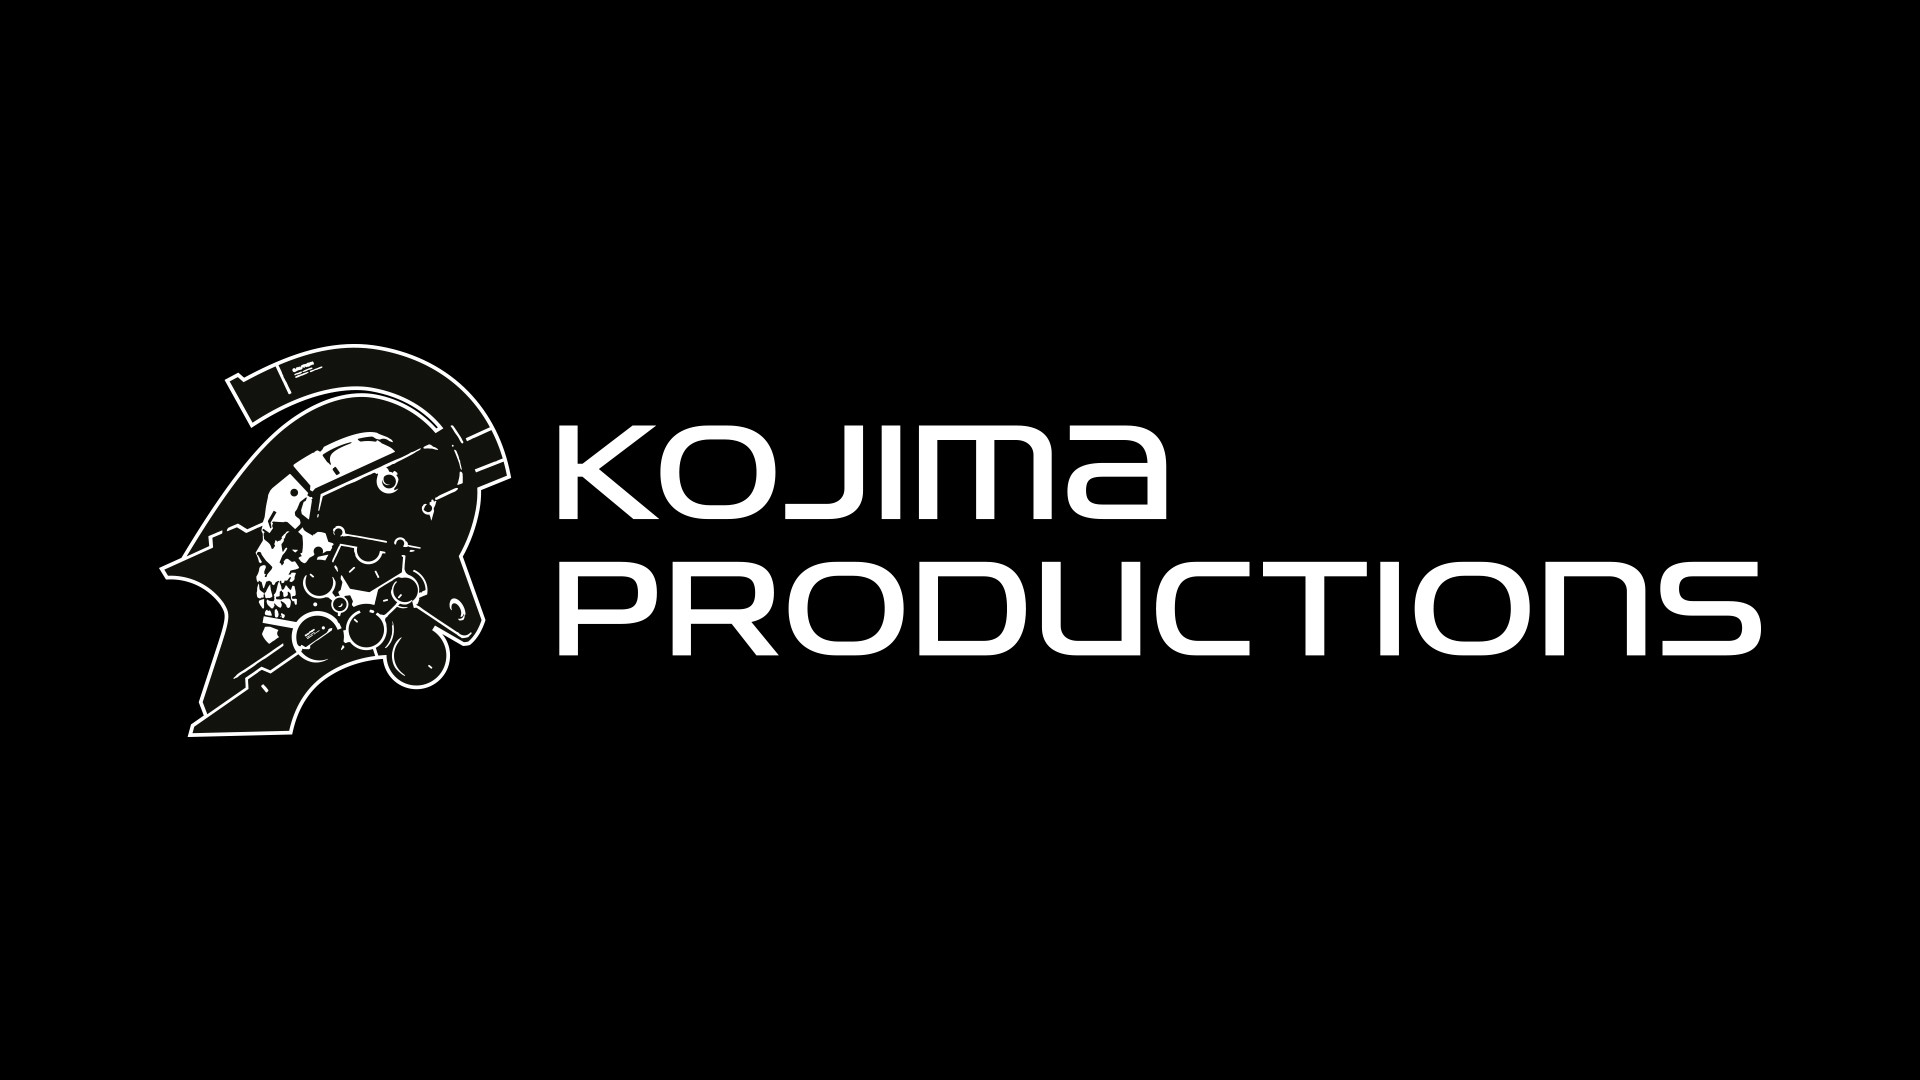 Xbox Game Studios team visits Kojima Productions in Tokyo to begin "exciting journey"